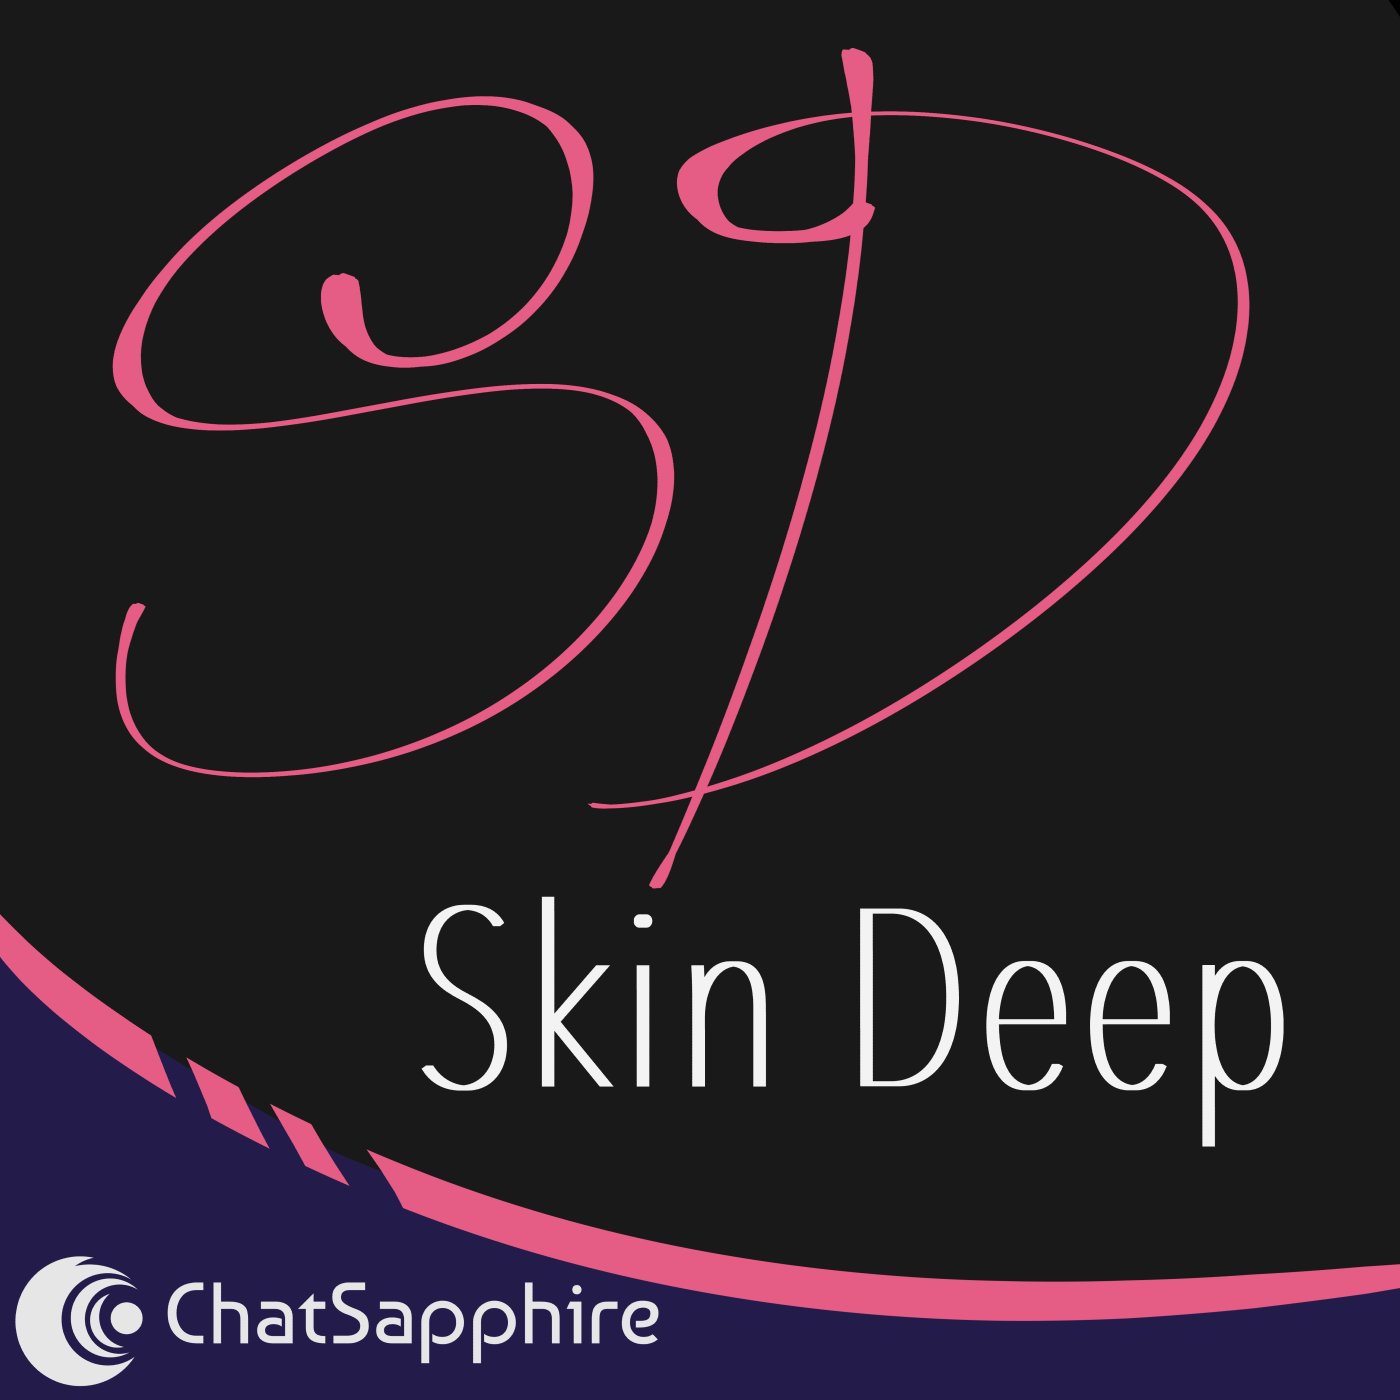 Artwork for Skin Deep by ChatSapphire